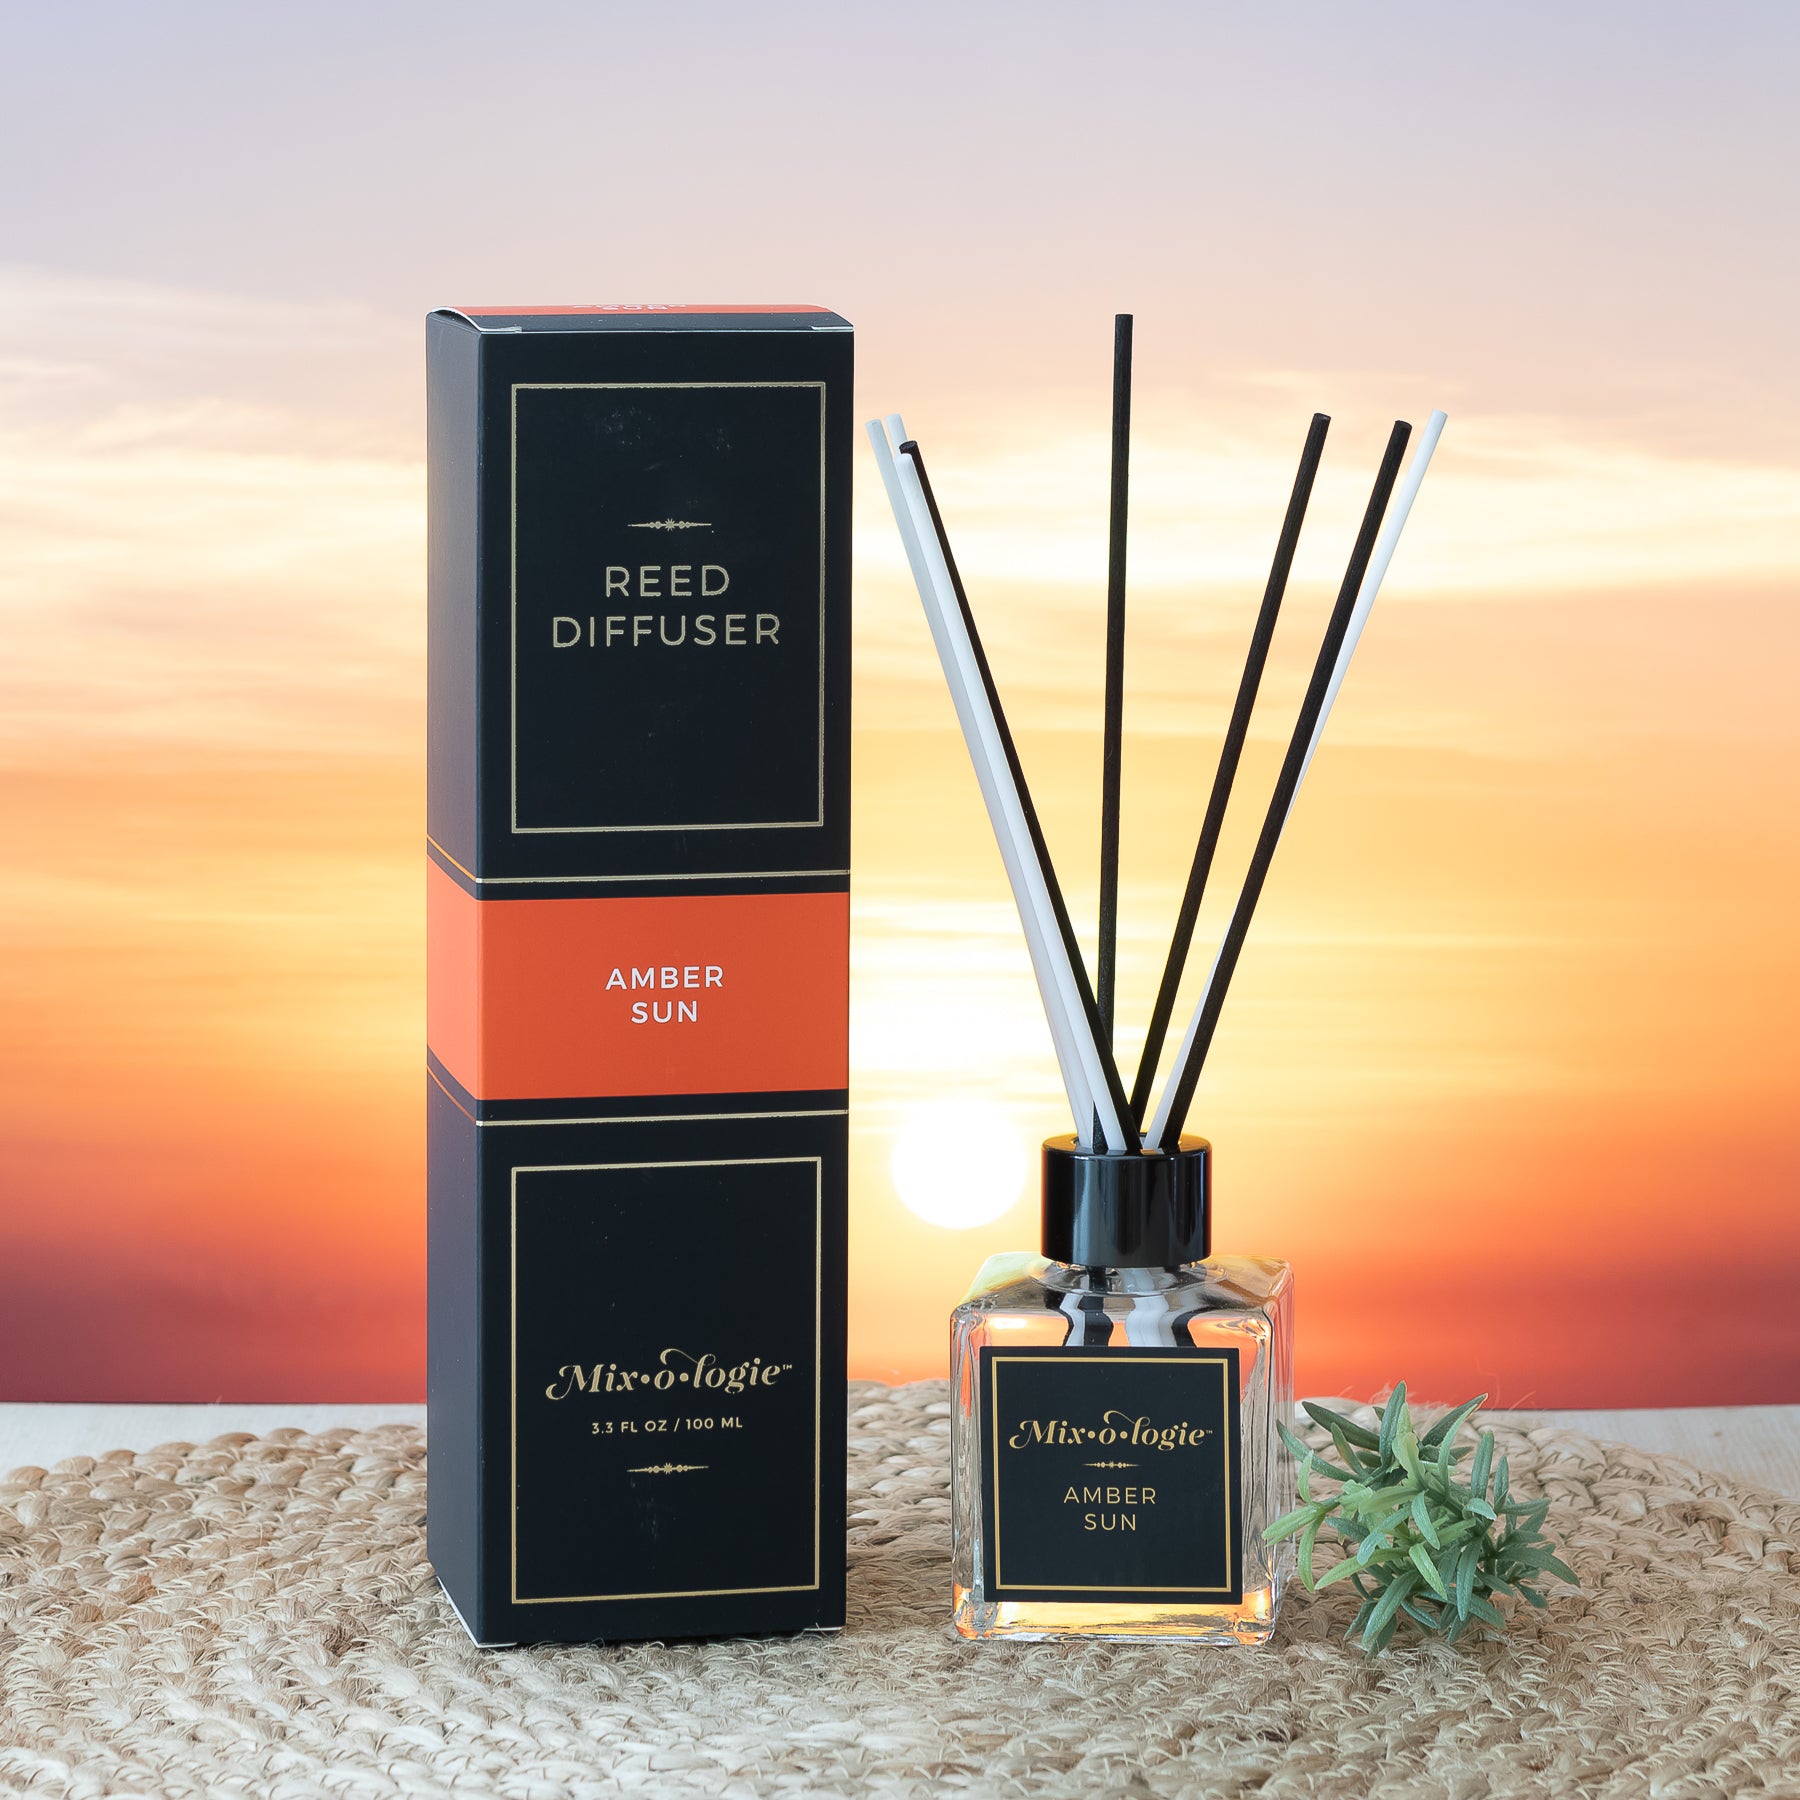 Mixologie Amber Sun scented Reed Diffuser 3.3 FL oz clear glass bottle with 8 diffuser reed sticks. Displayed in front of sunset. 